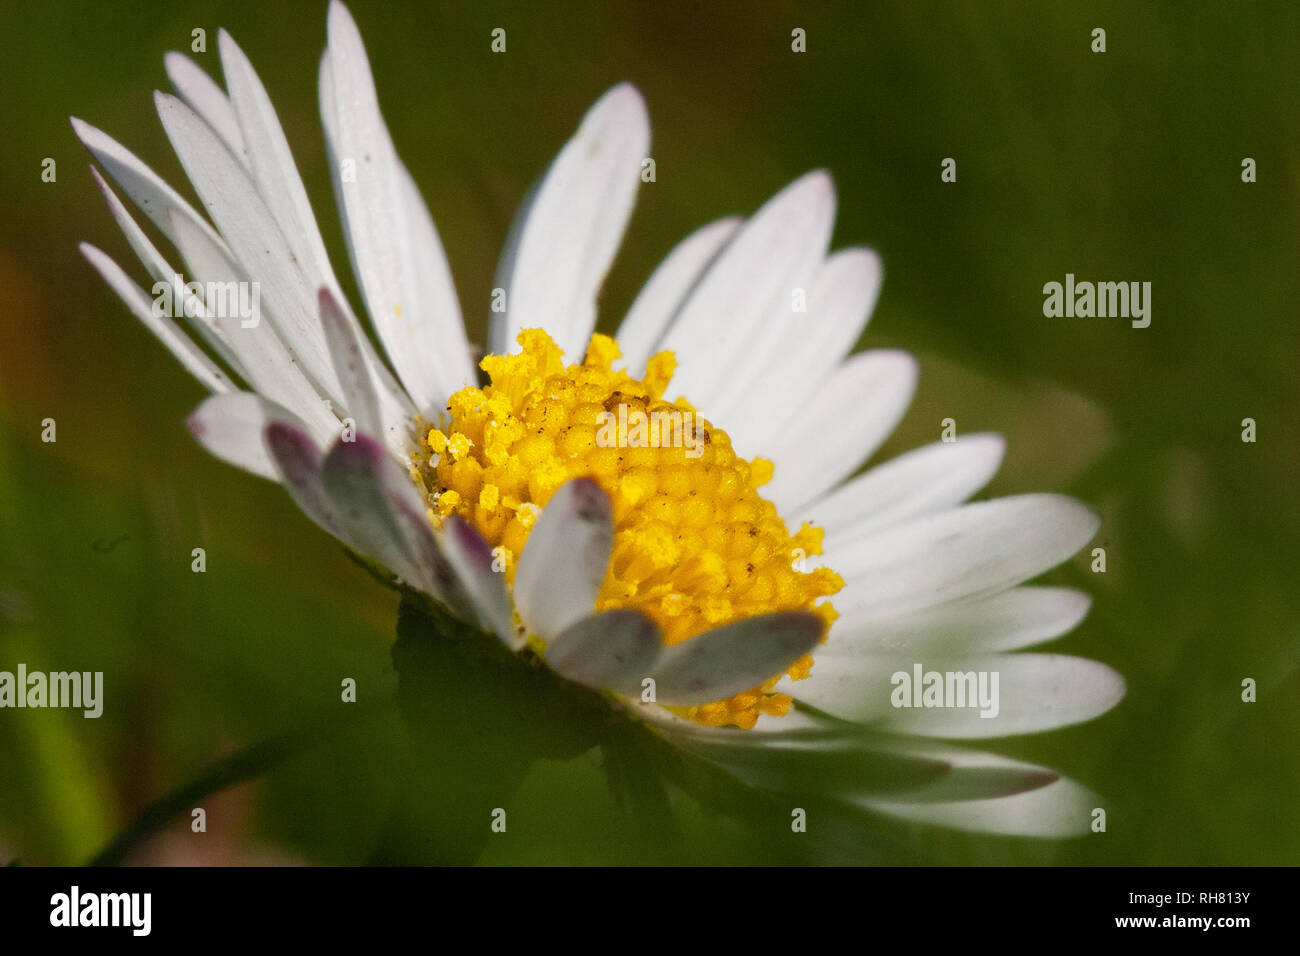 Close-up of the white flower of Daisy, Bellis perennis Stock Photo